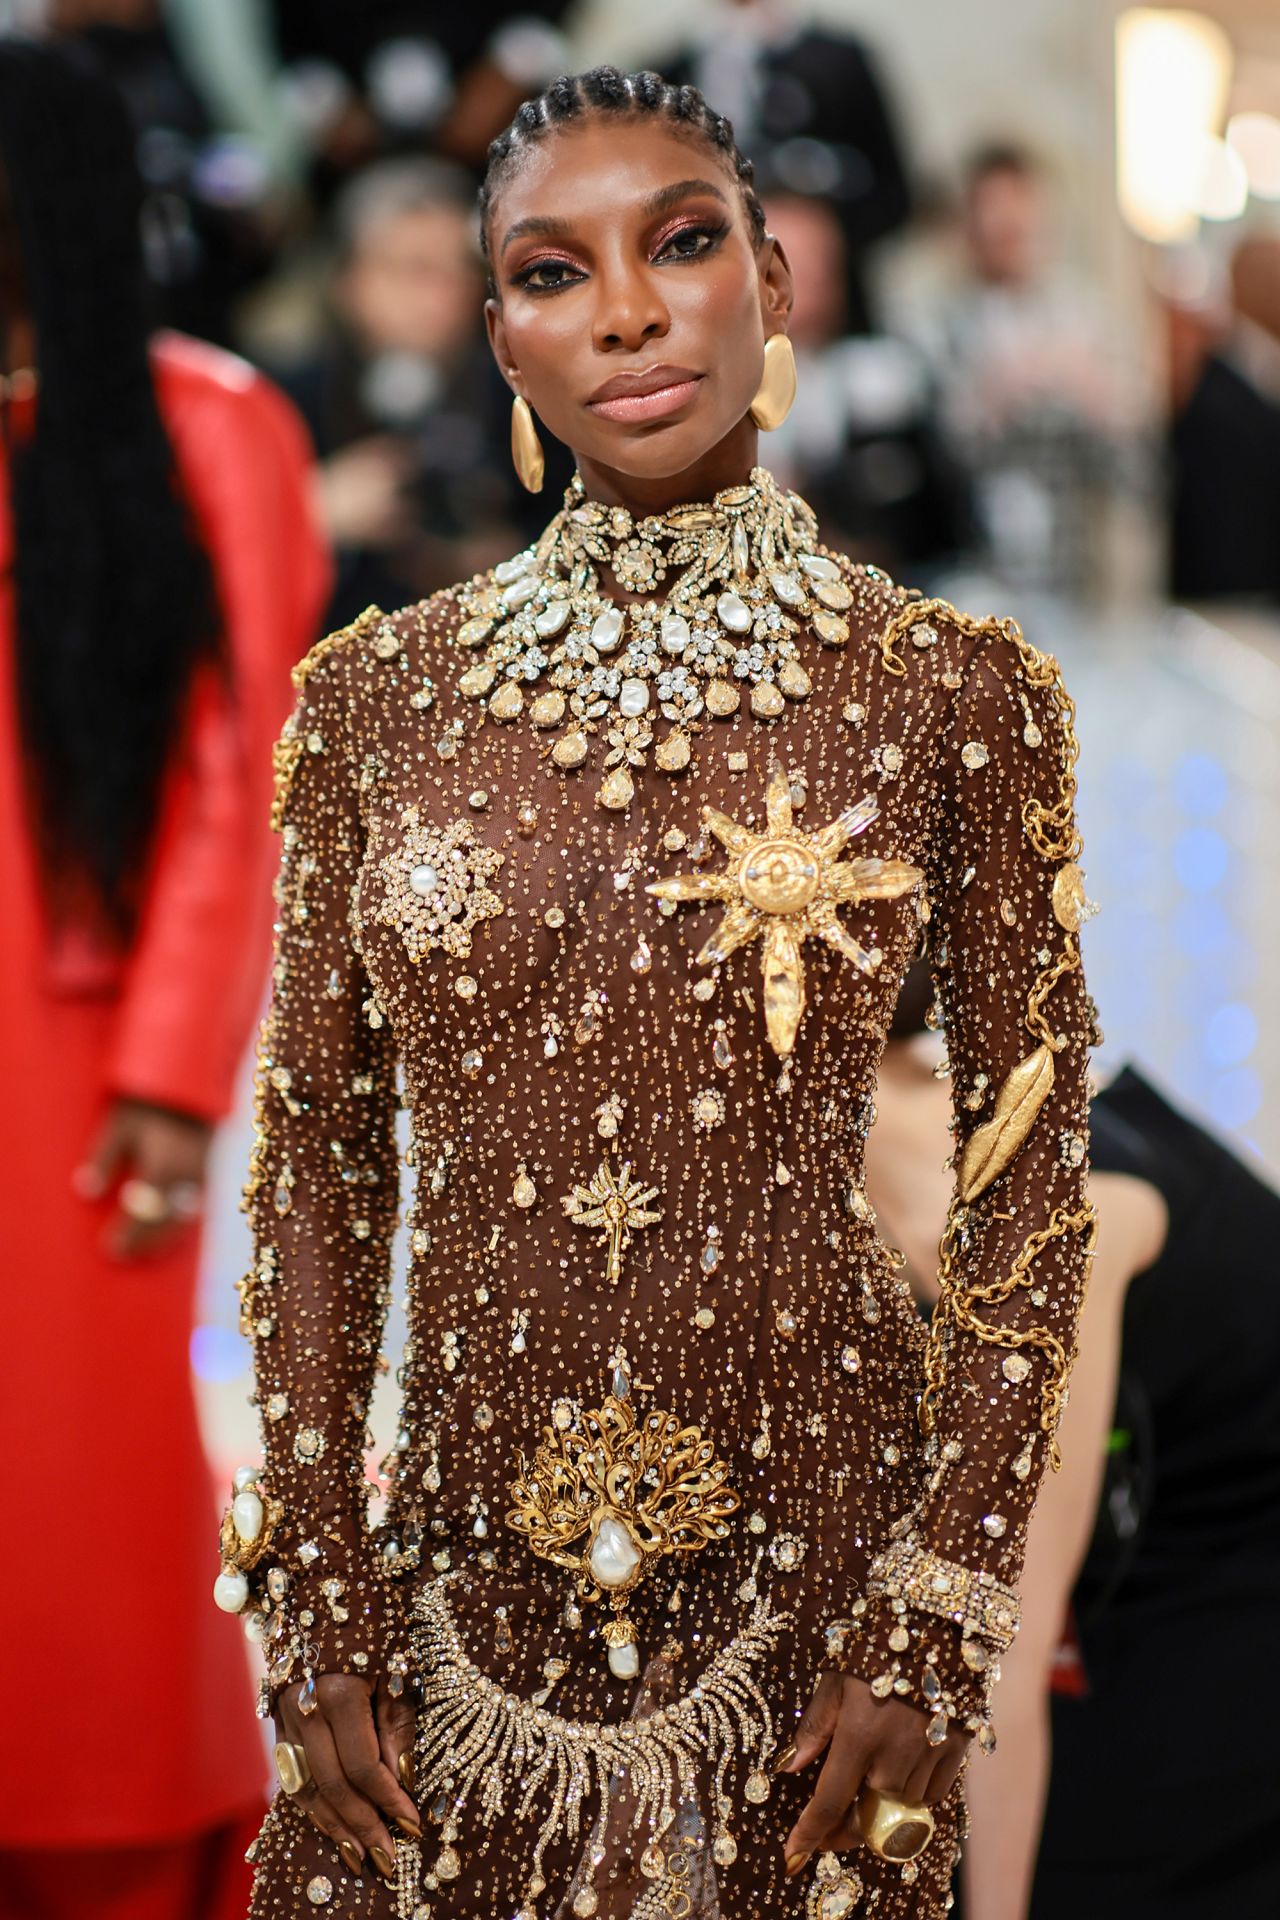 Met Gala co-chair Michaela Coel's Schiaparelli gown was meticulously made with more than 130,000 crystals and gemstones.
